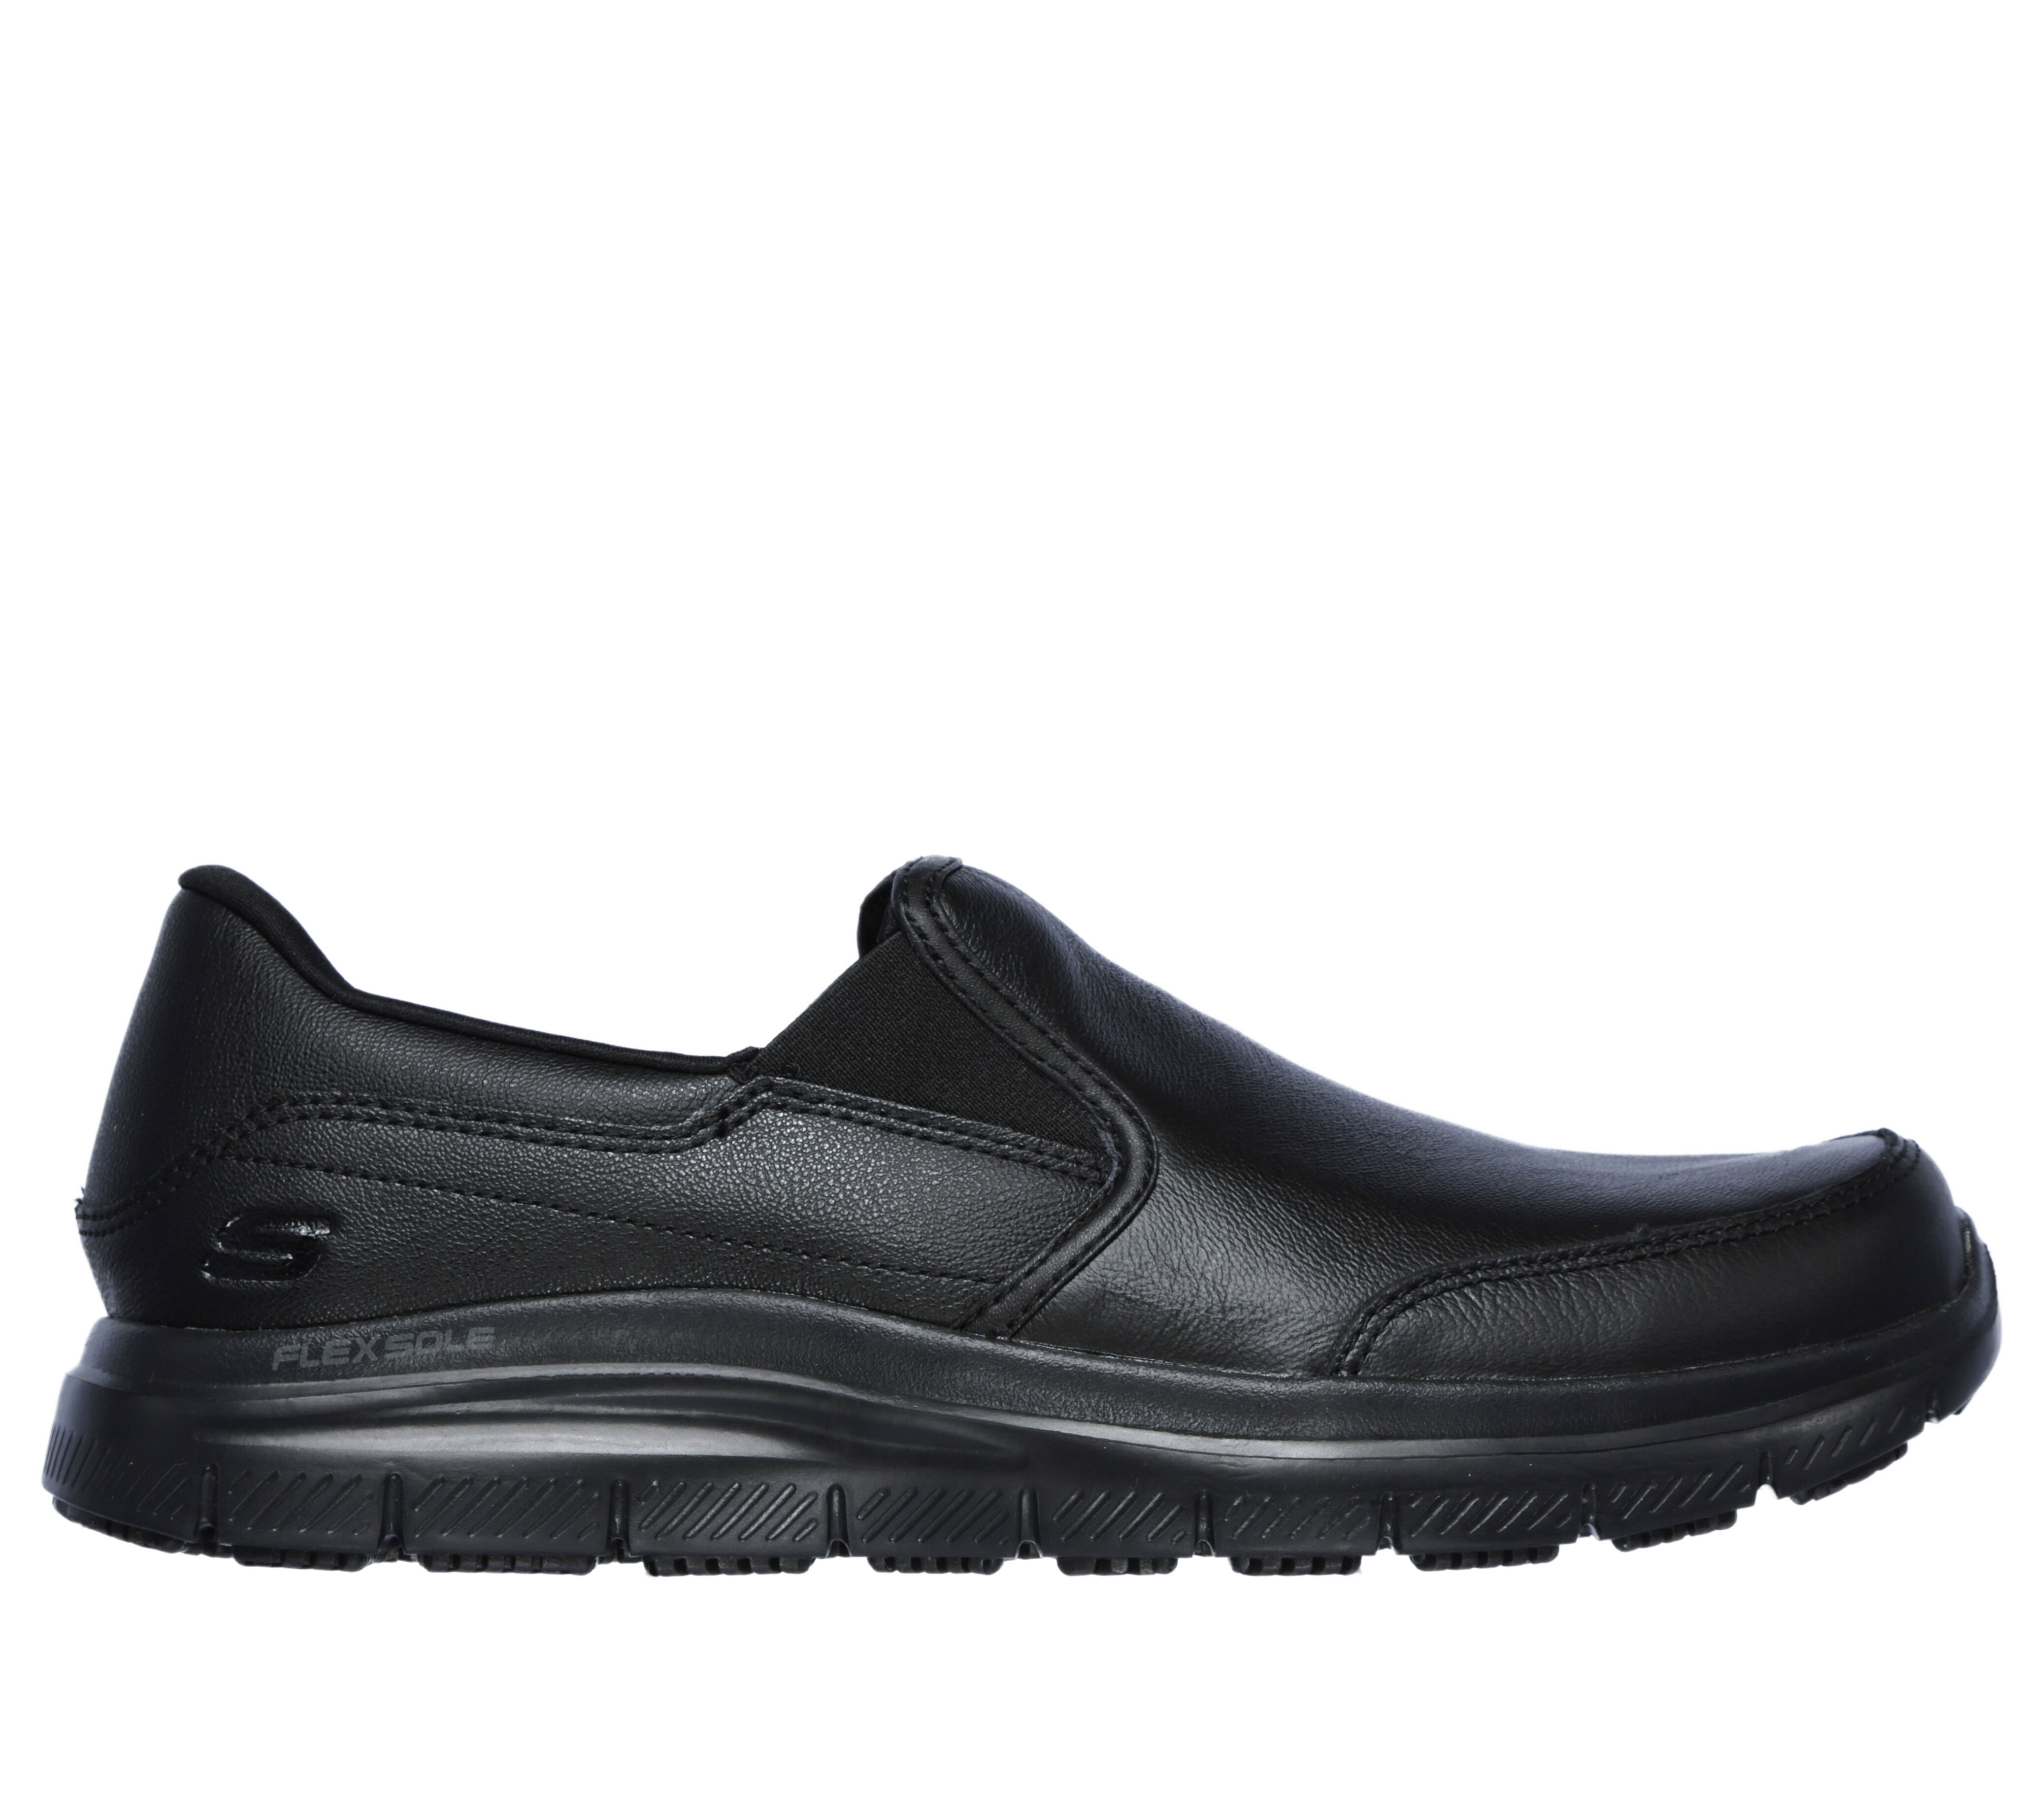 skechers composite safety shoes